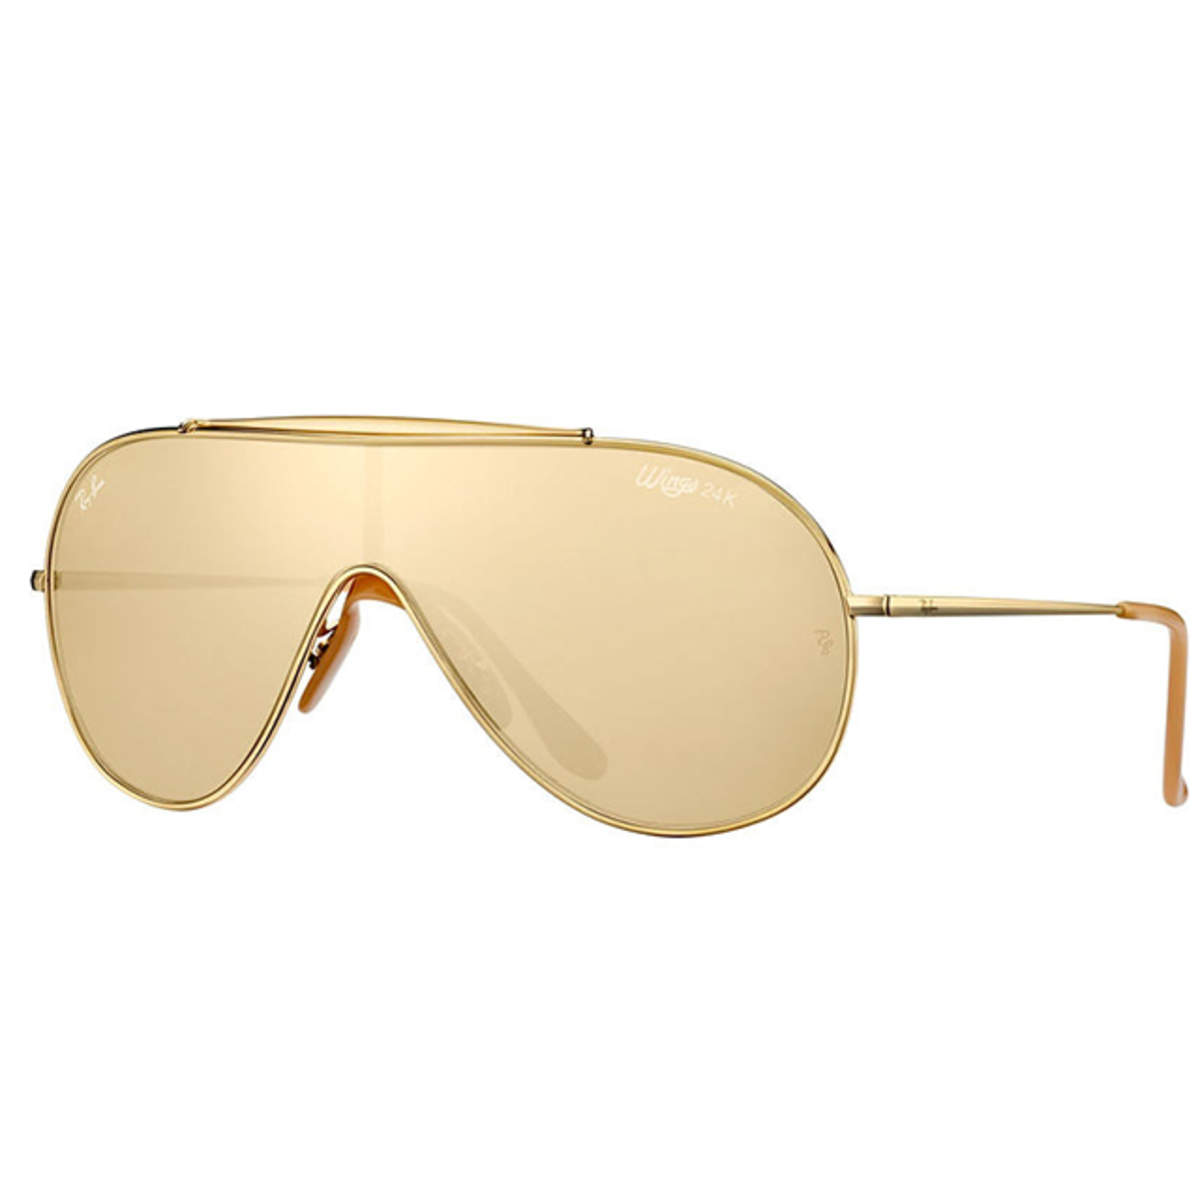 Ray-Ban Aviators: Ray-Ban just dropped a pair of limited edition, 24-carat  gold aviators for $500 - The Economic Times